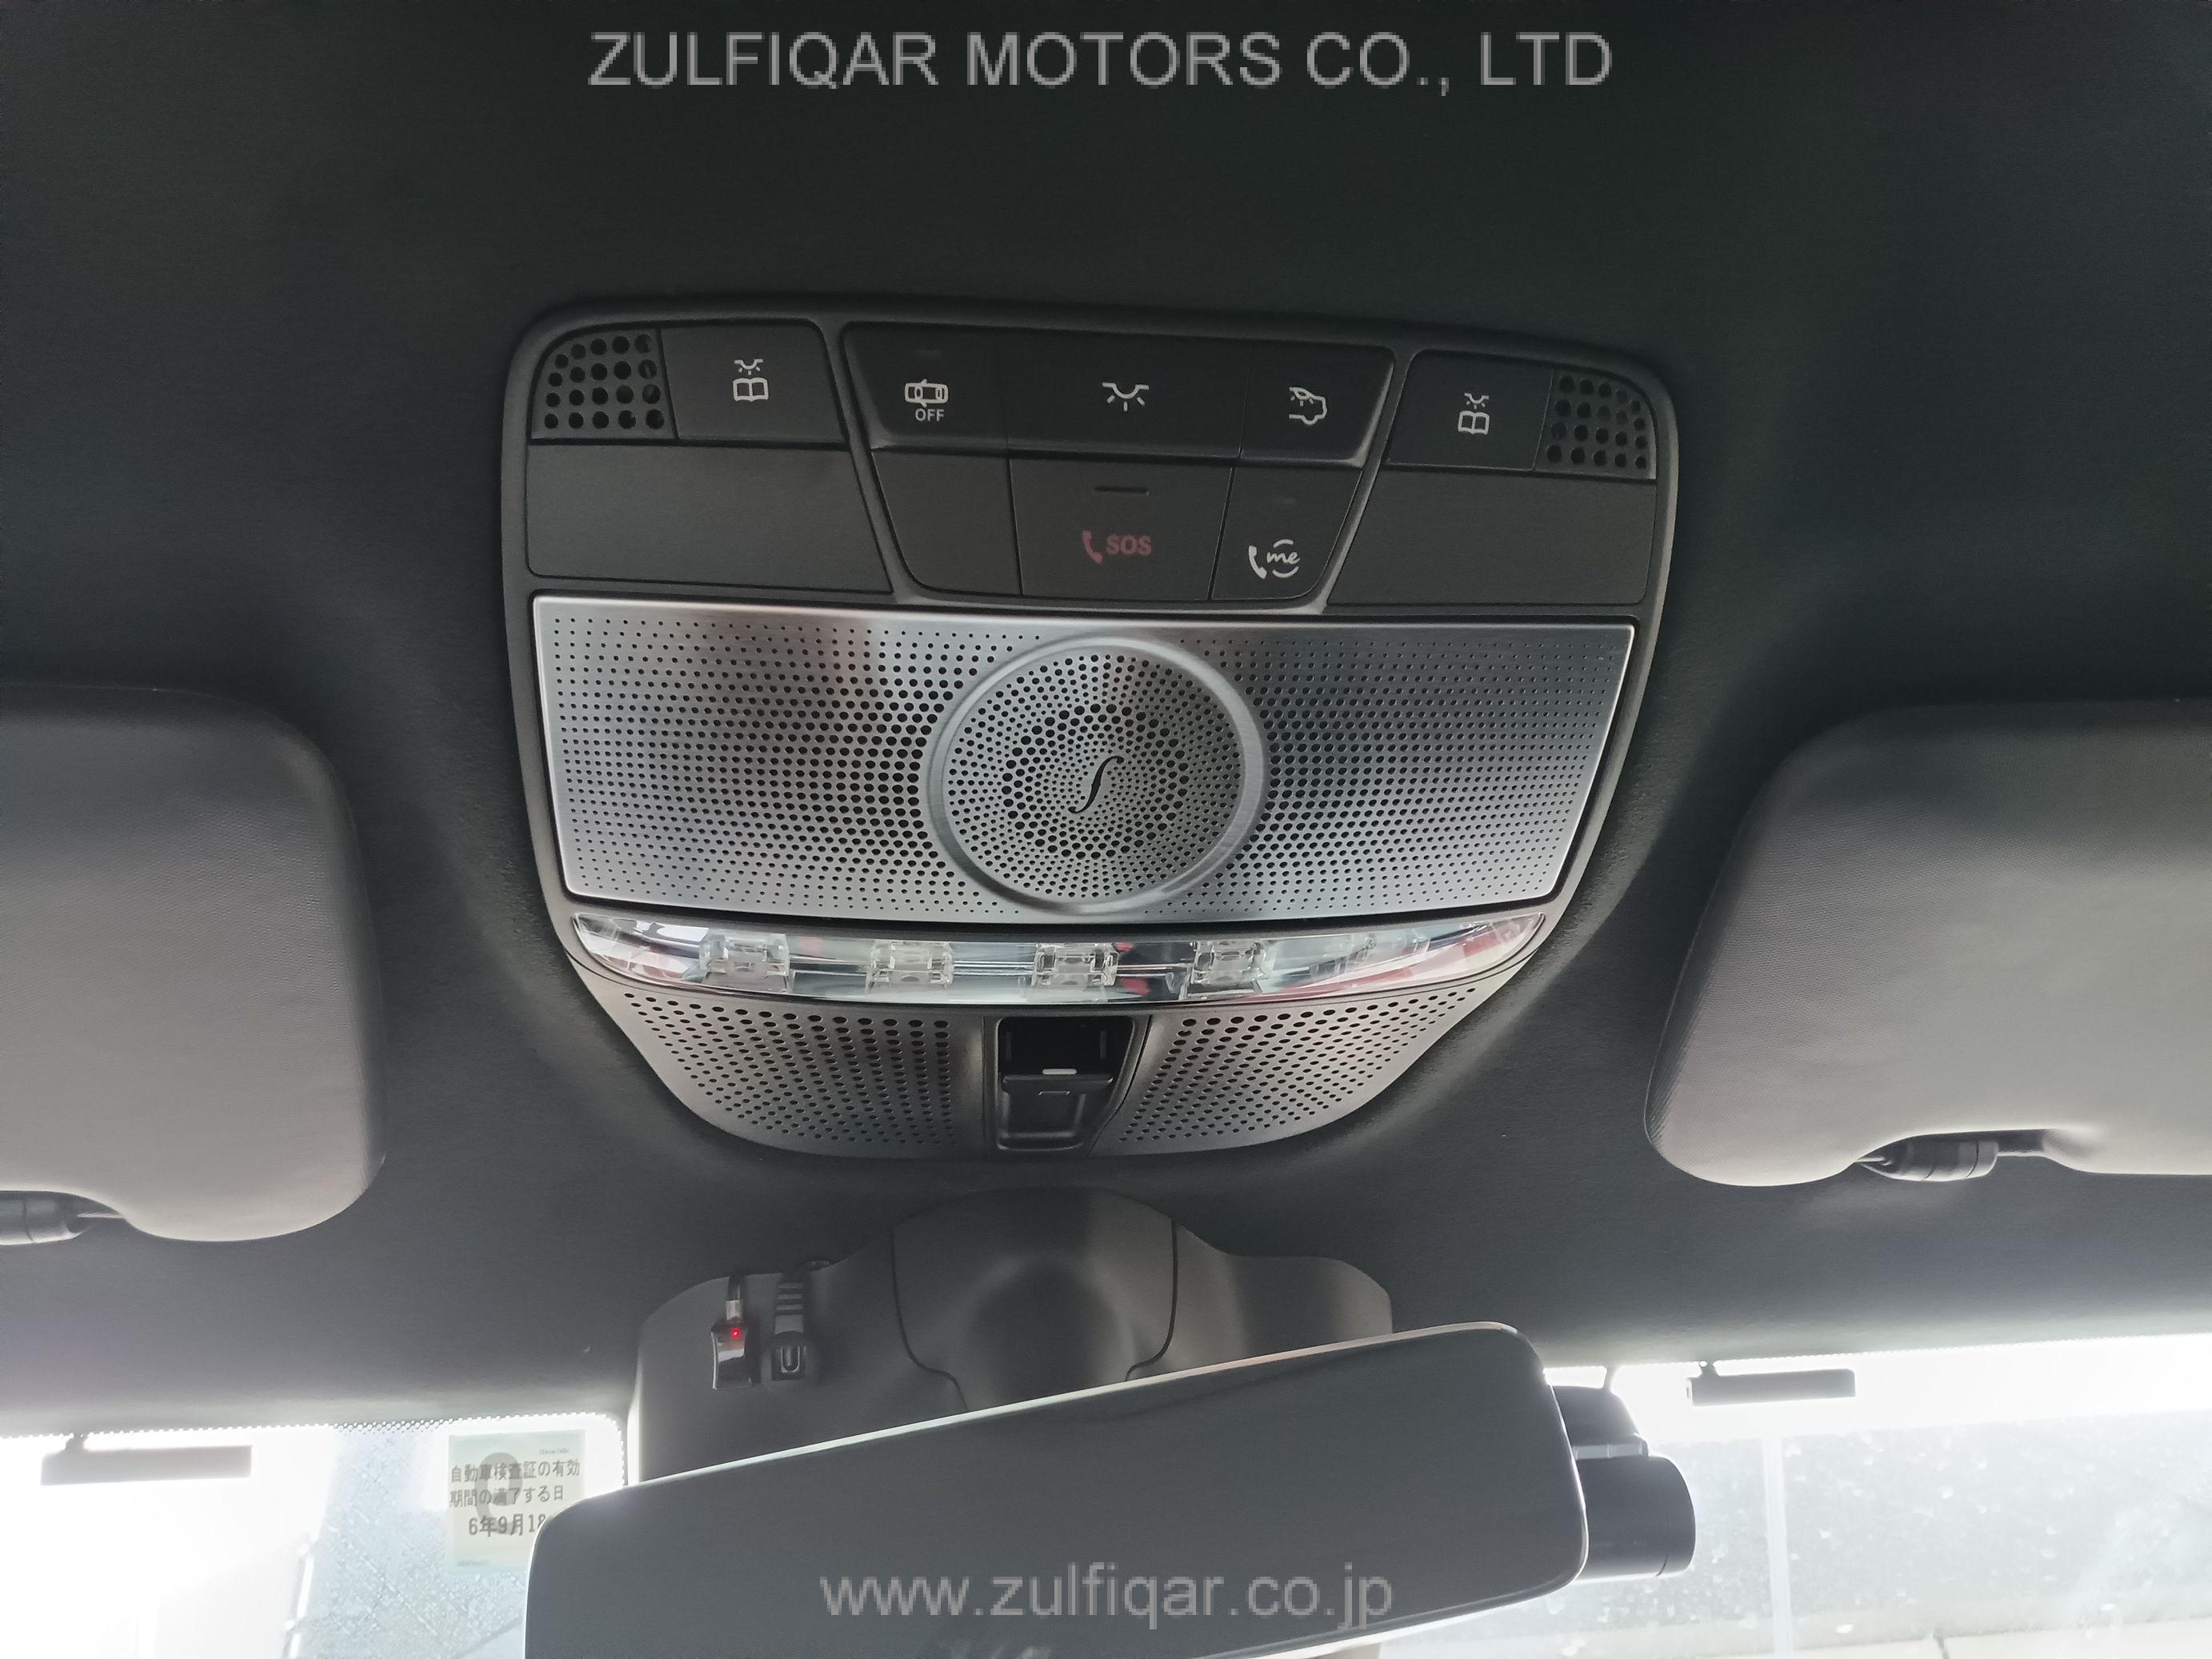 MERCEDES AMG G CLASS 2019 Image 71